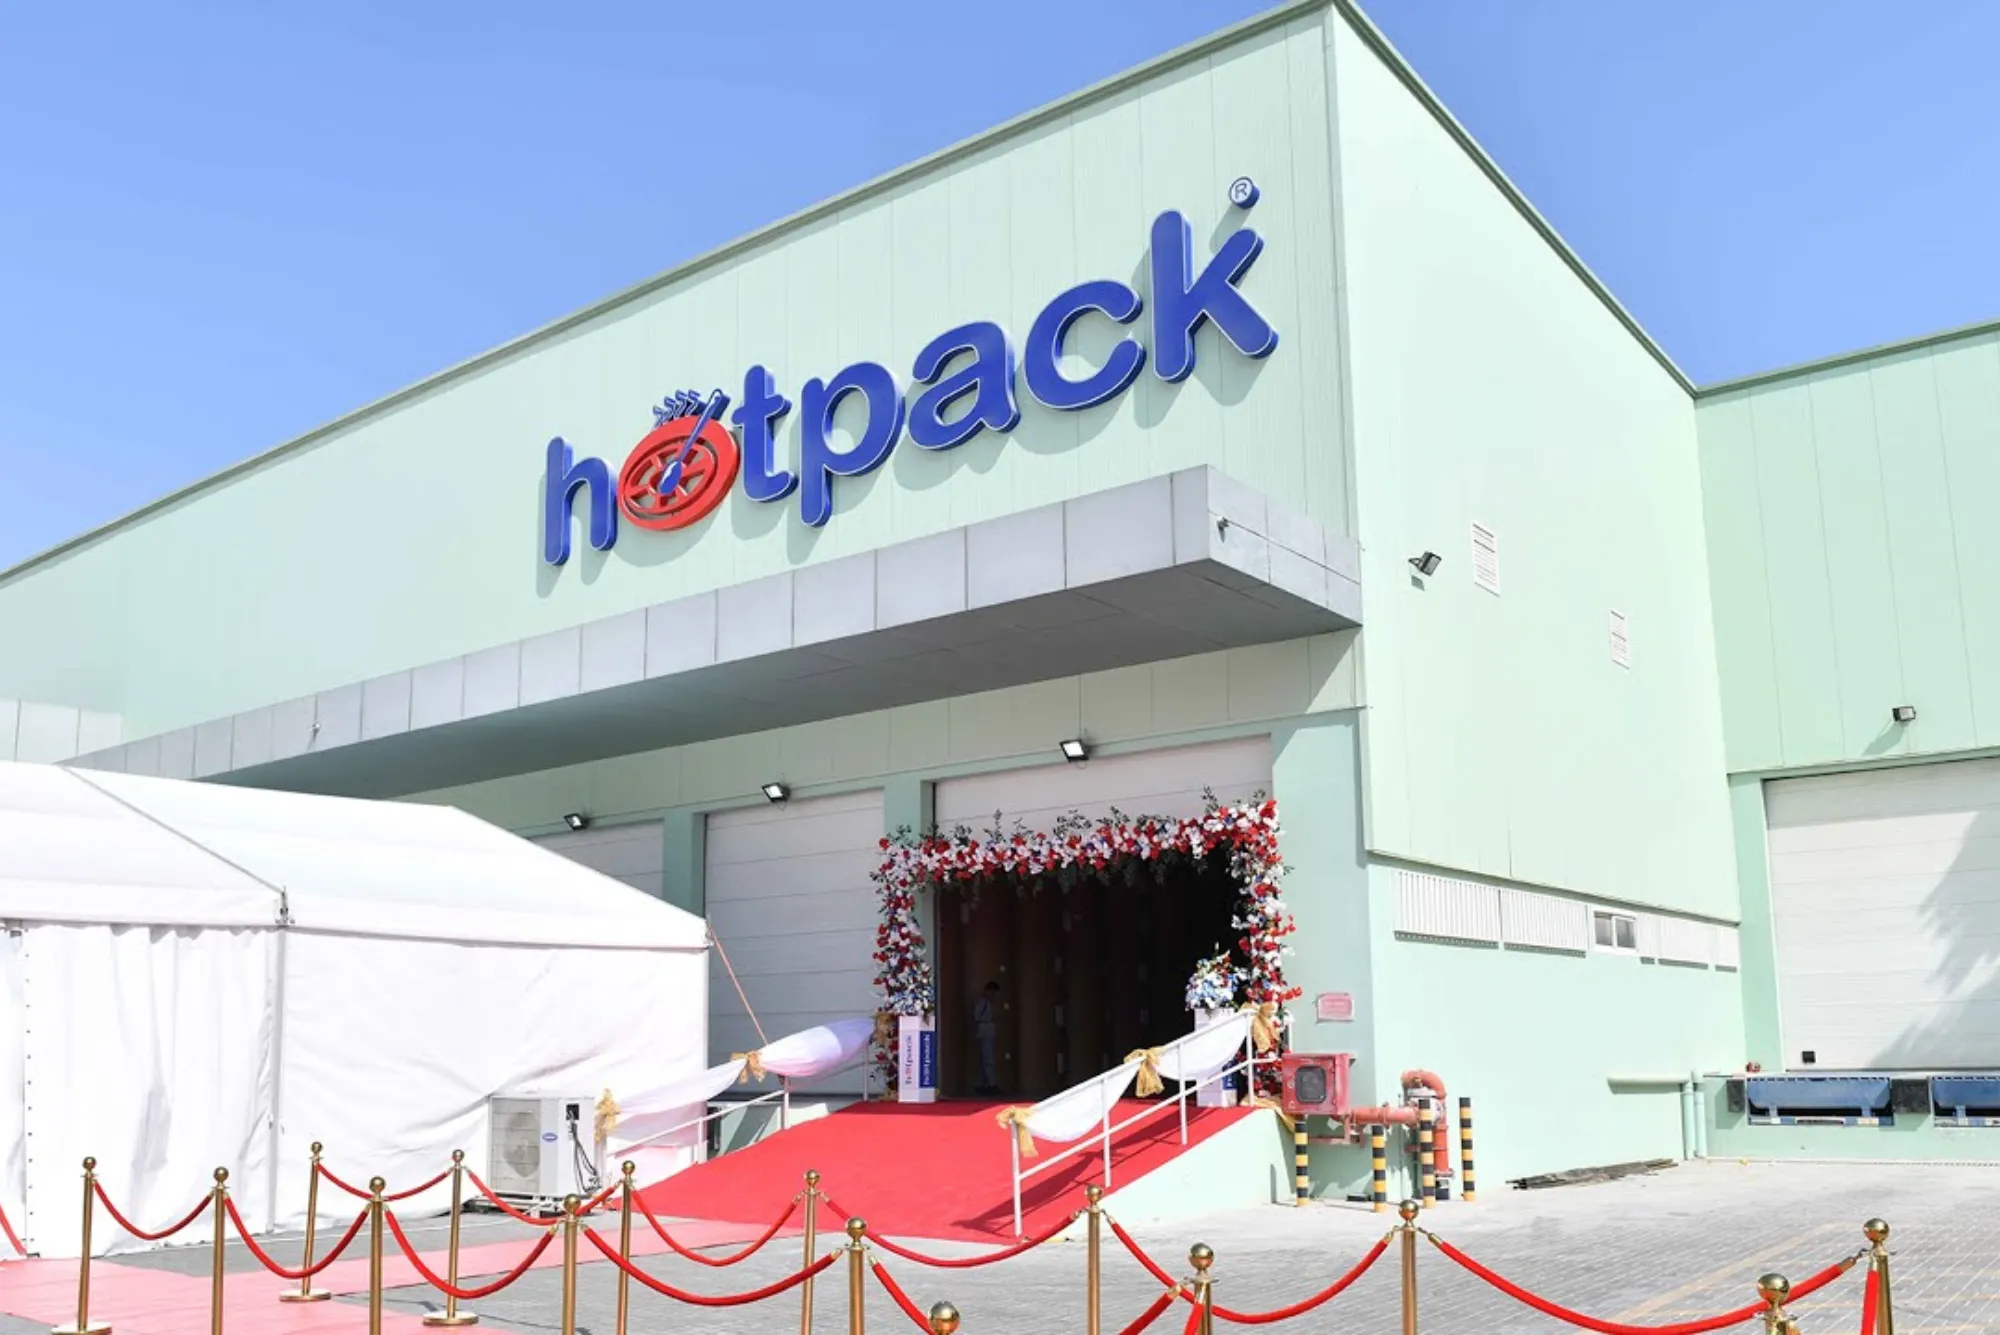 Hotpack Dubai Owner: Insights into the Success Story